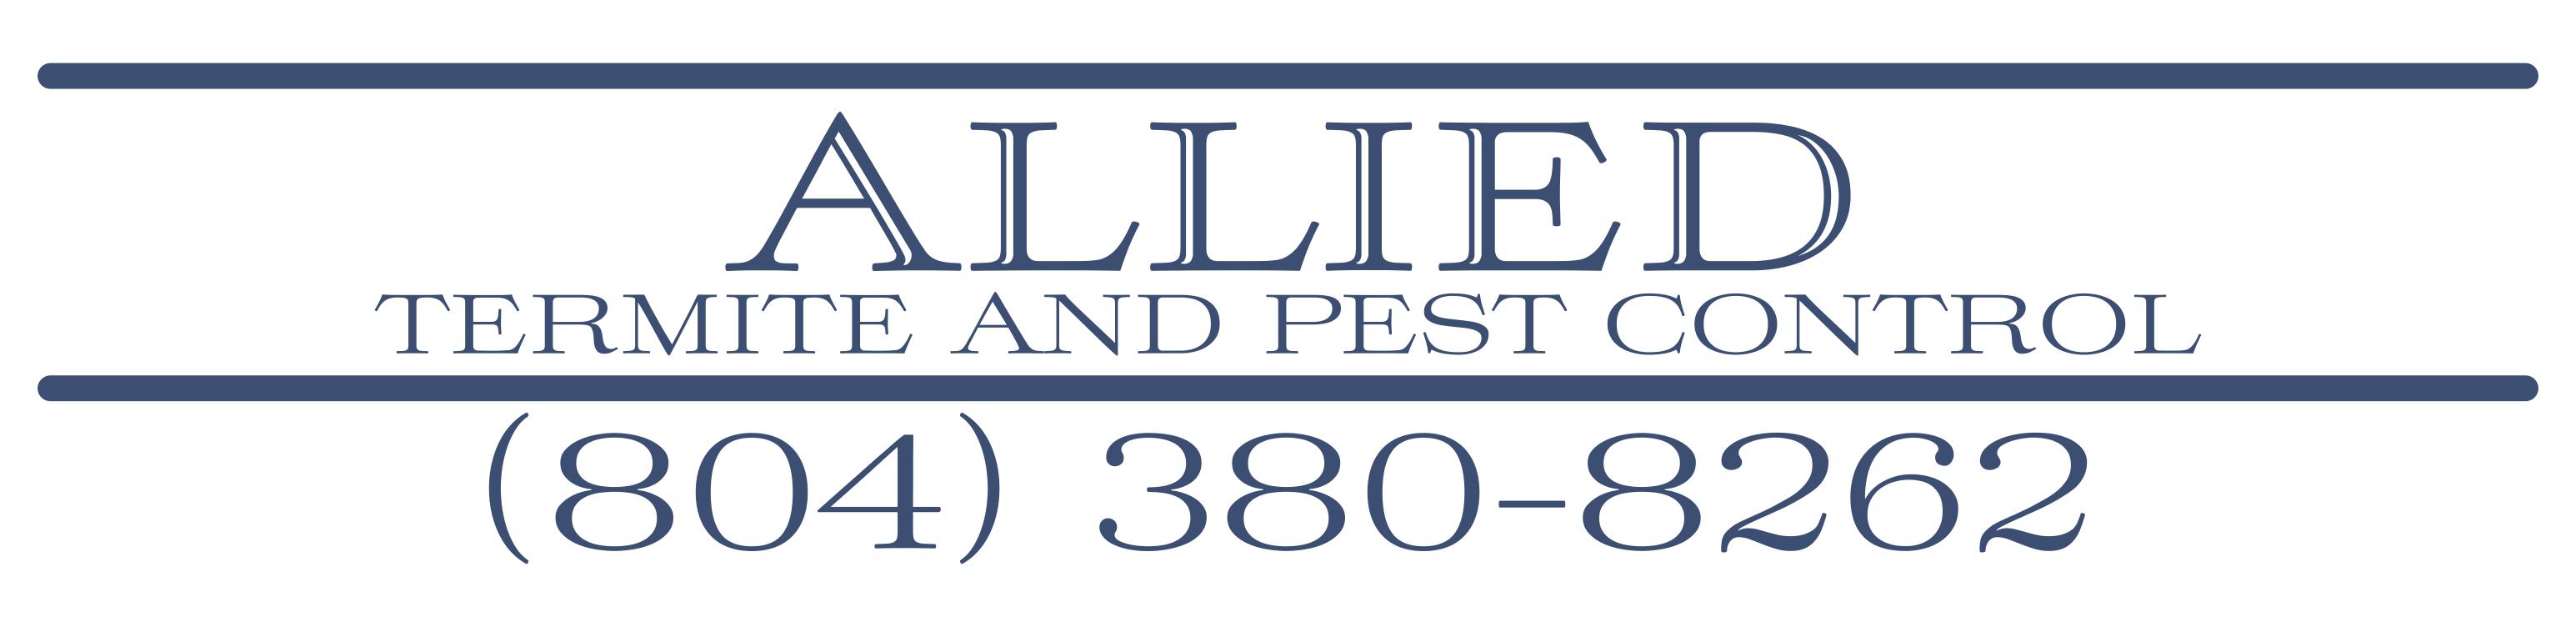 Allied Termite and Pest Control Of Greater Richmond Logo